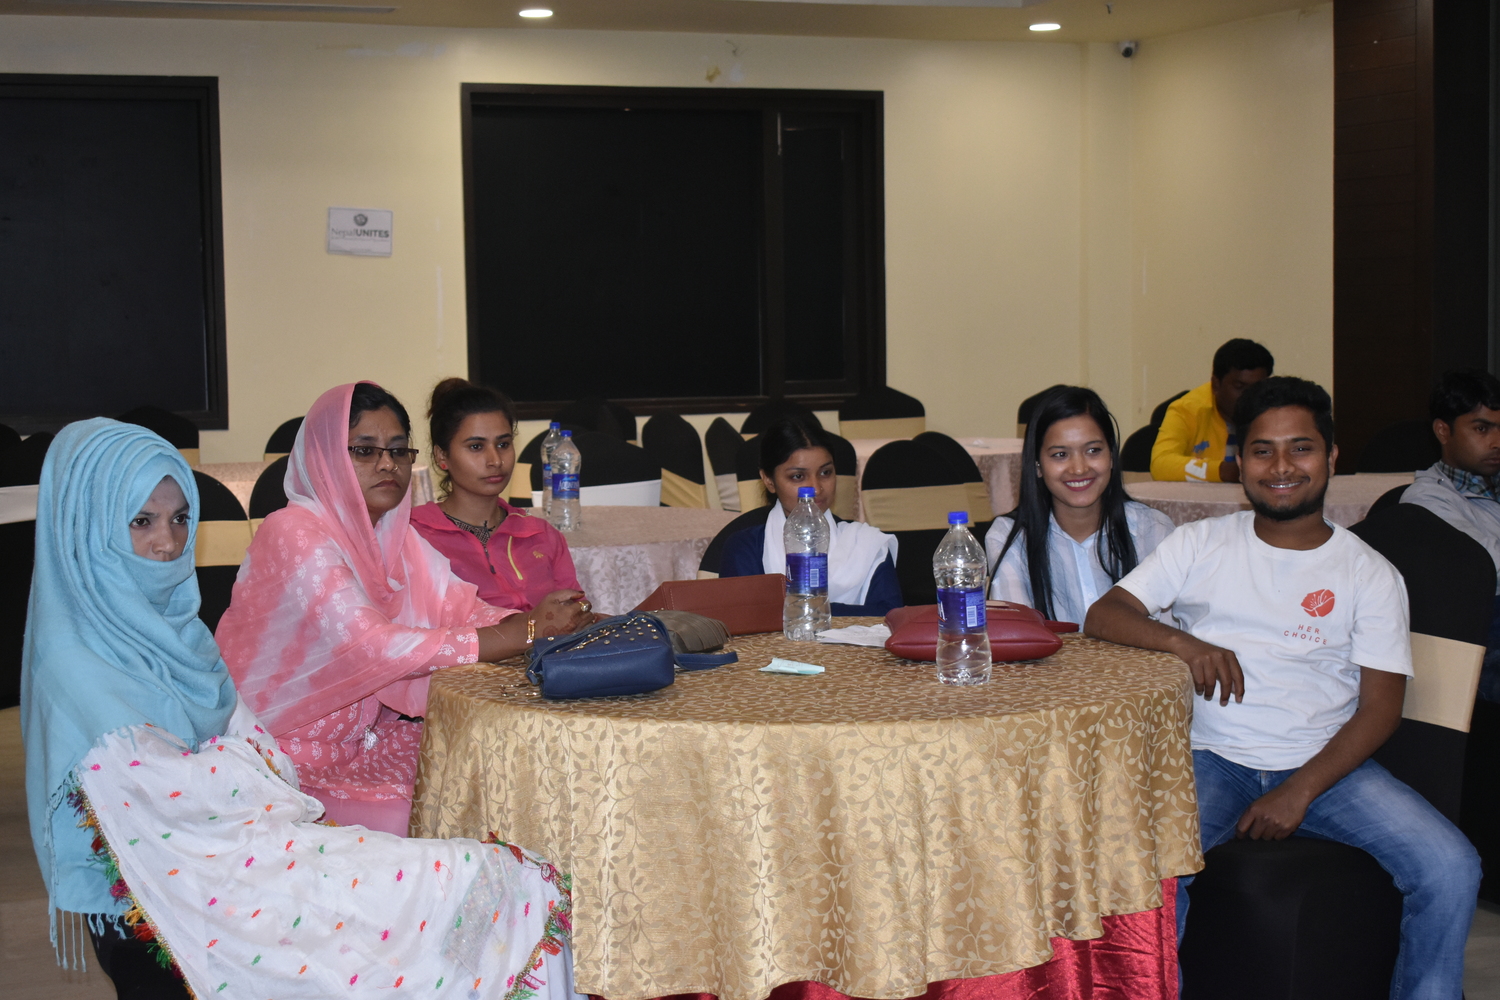 Inter Religious Dialogues with Religious Leaders